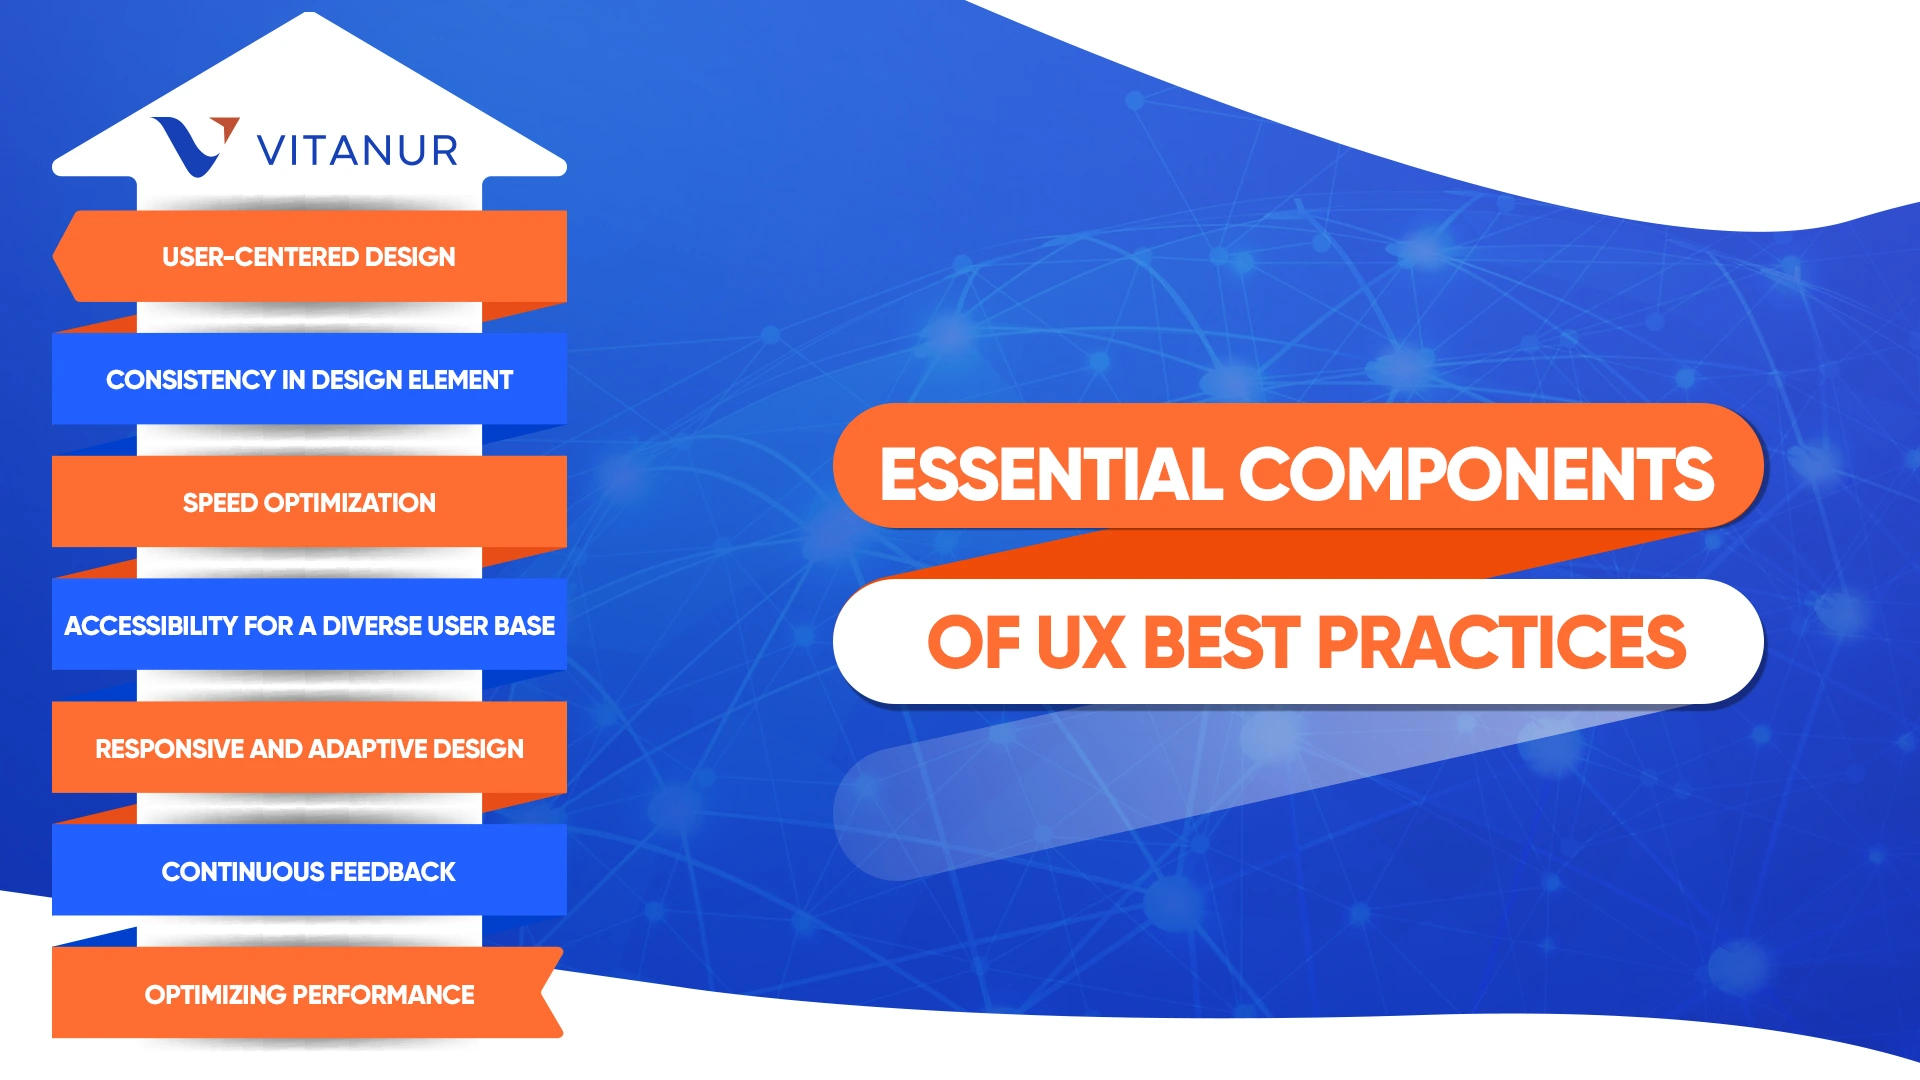 essential components of ux practices